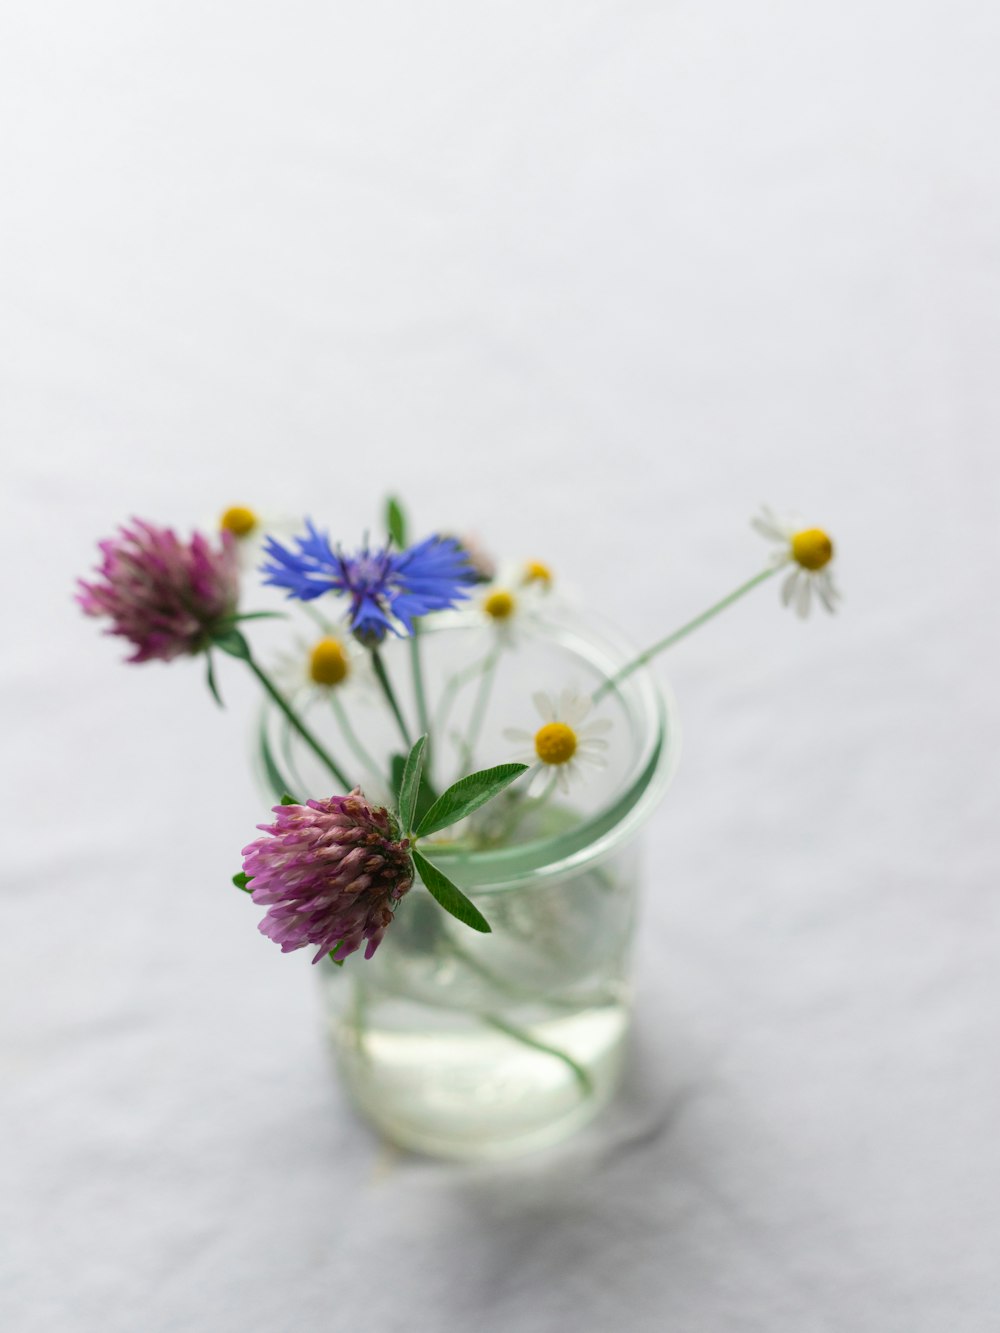 purple and white flowers in clear glass vase